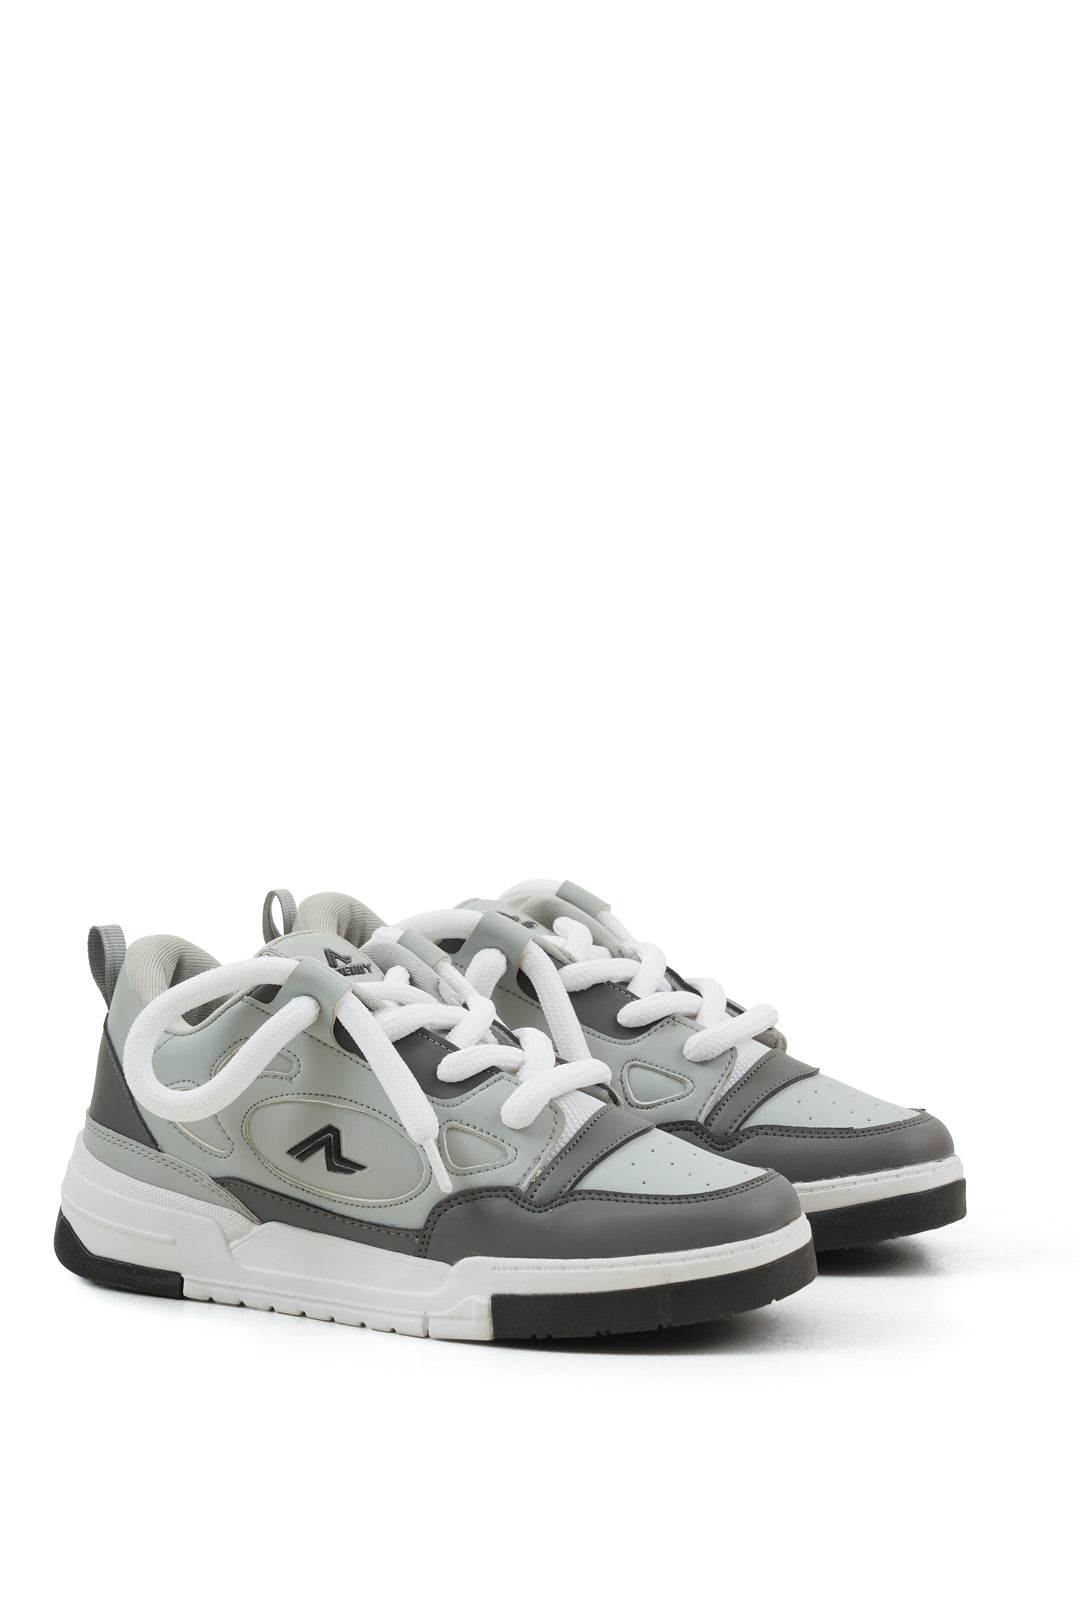 OGY Smoky Grey Low Top Trainer